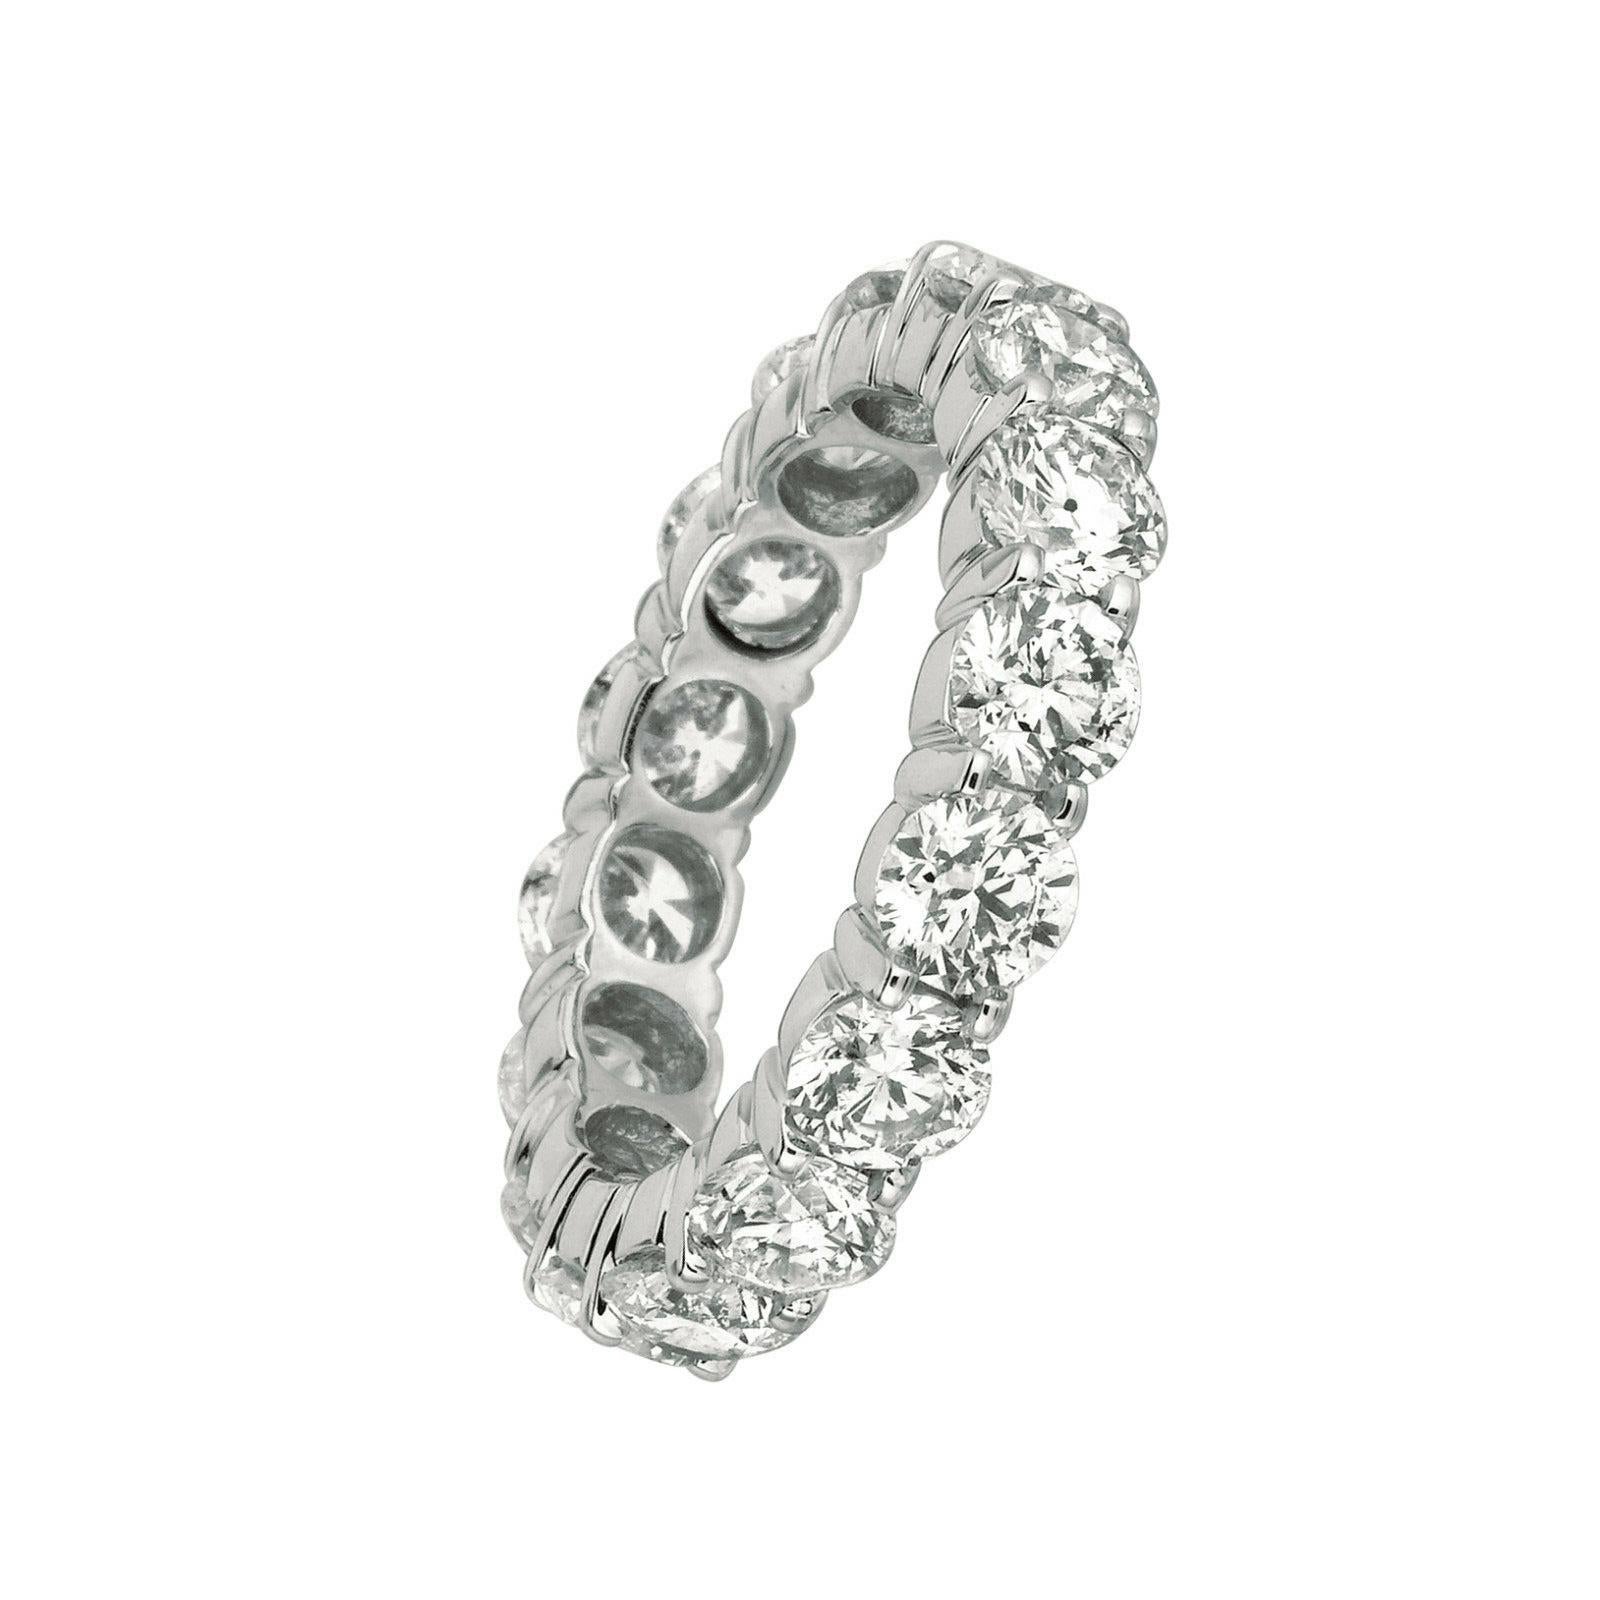 4.80 Carat Natural Diamond Eternity Ring G SI 18K White Gold

100% Natural Diamonds, Not Enhanced in any way Round Cut Diamond Eternity Band 
4.80CT
G-H 
SI  
18K White Gold  Prong style   3.80 grams
 5 mm in width 
Size 7
16 stones 

MM40W.30

ALL